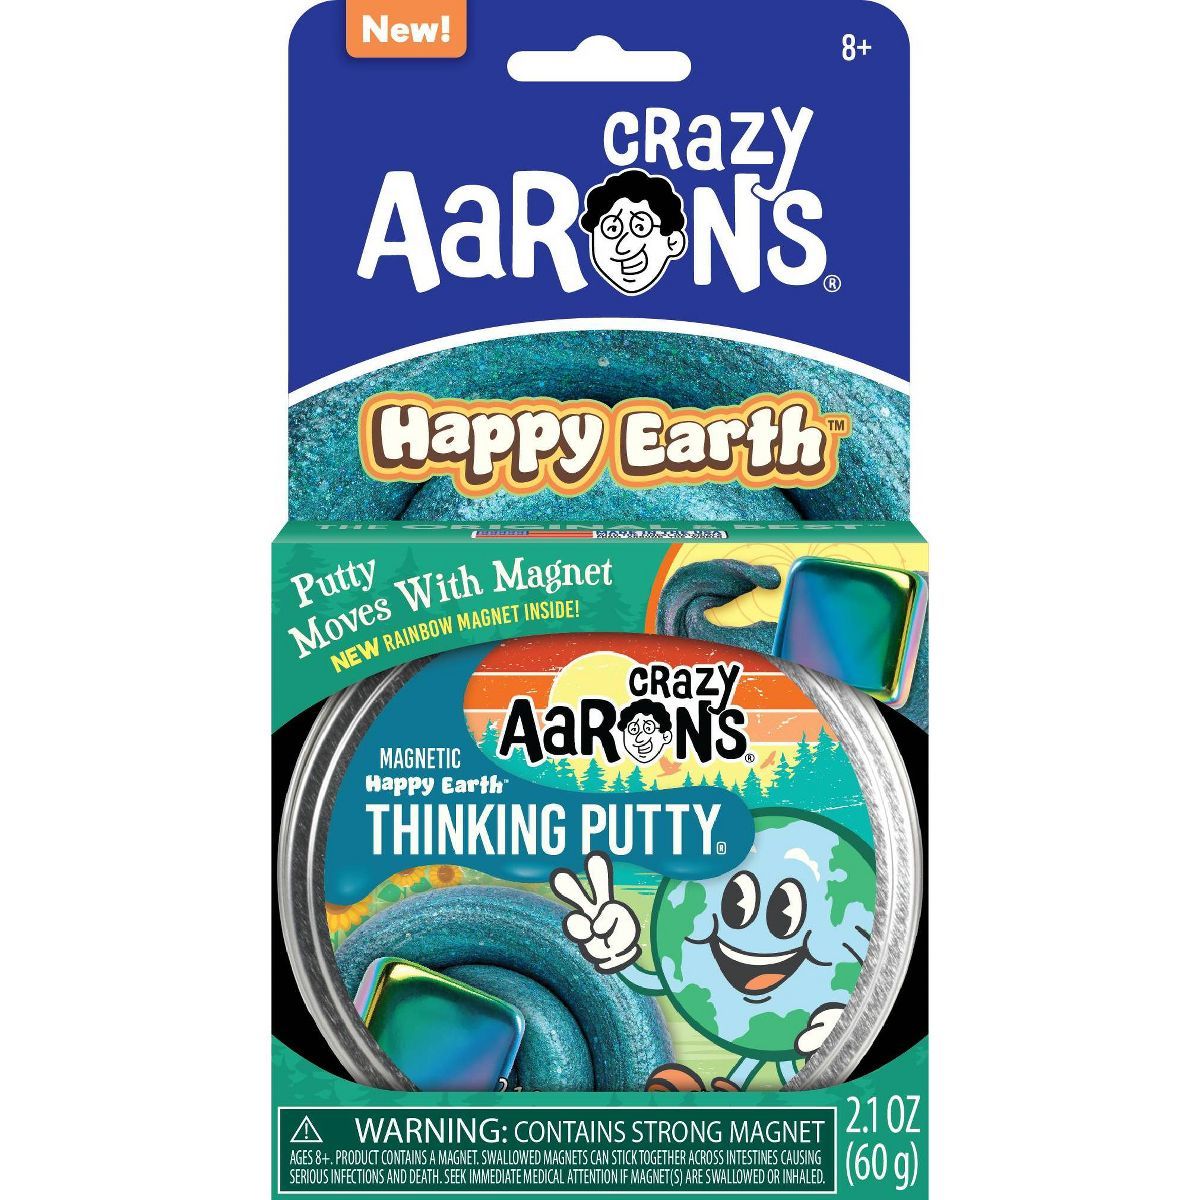 Crazy Aaron's Happy Earth Magnetic 3.5" Thinking Putty Tin | Target